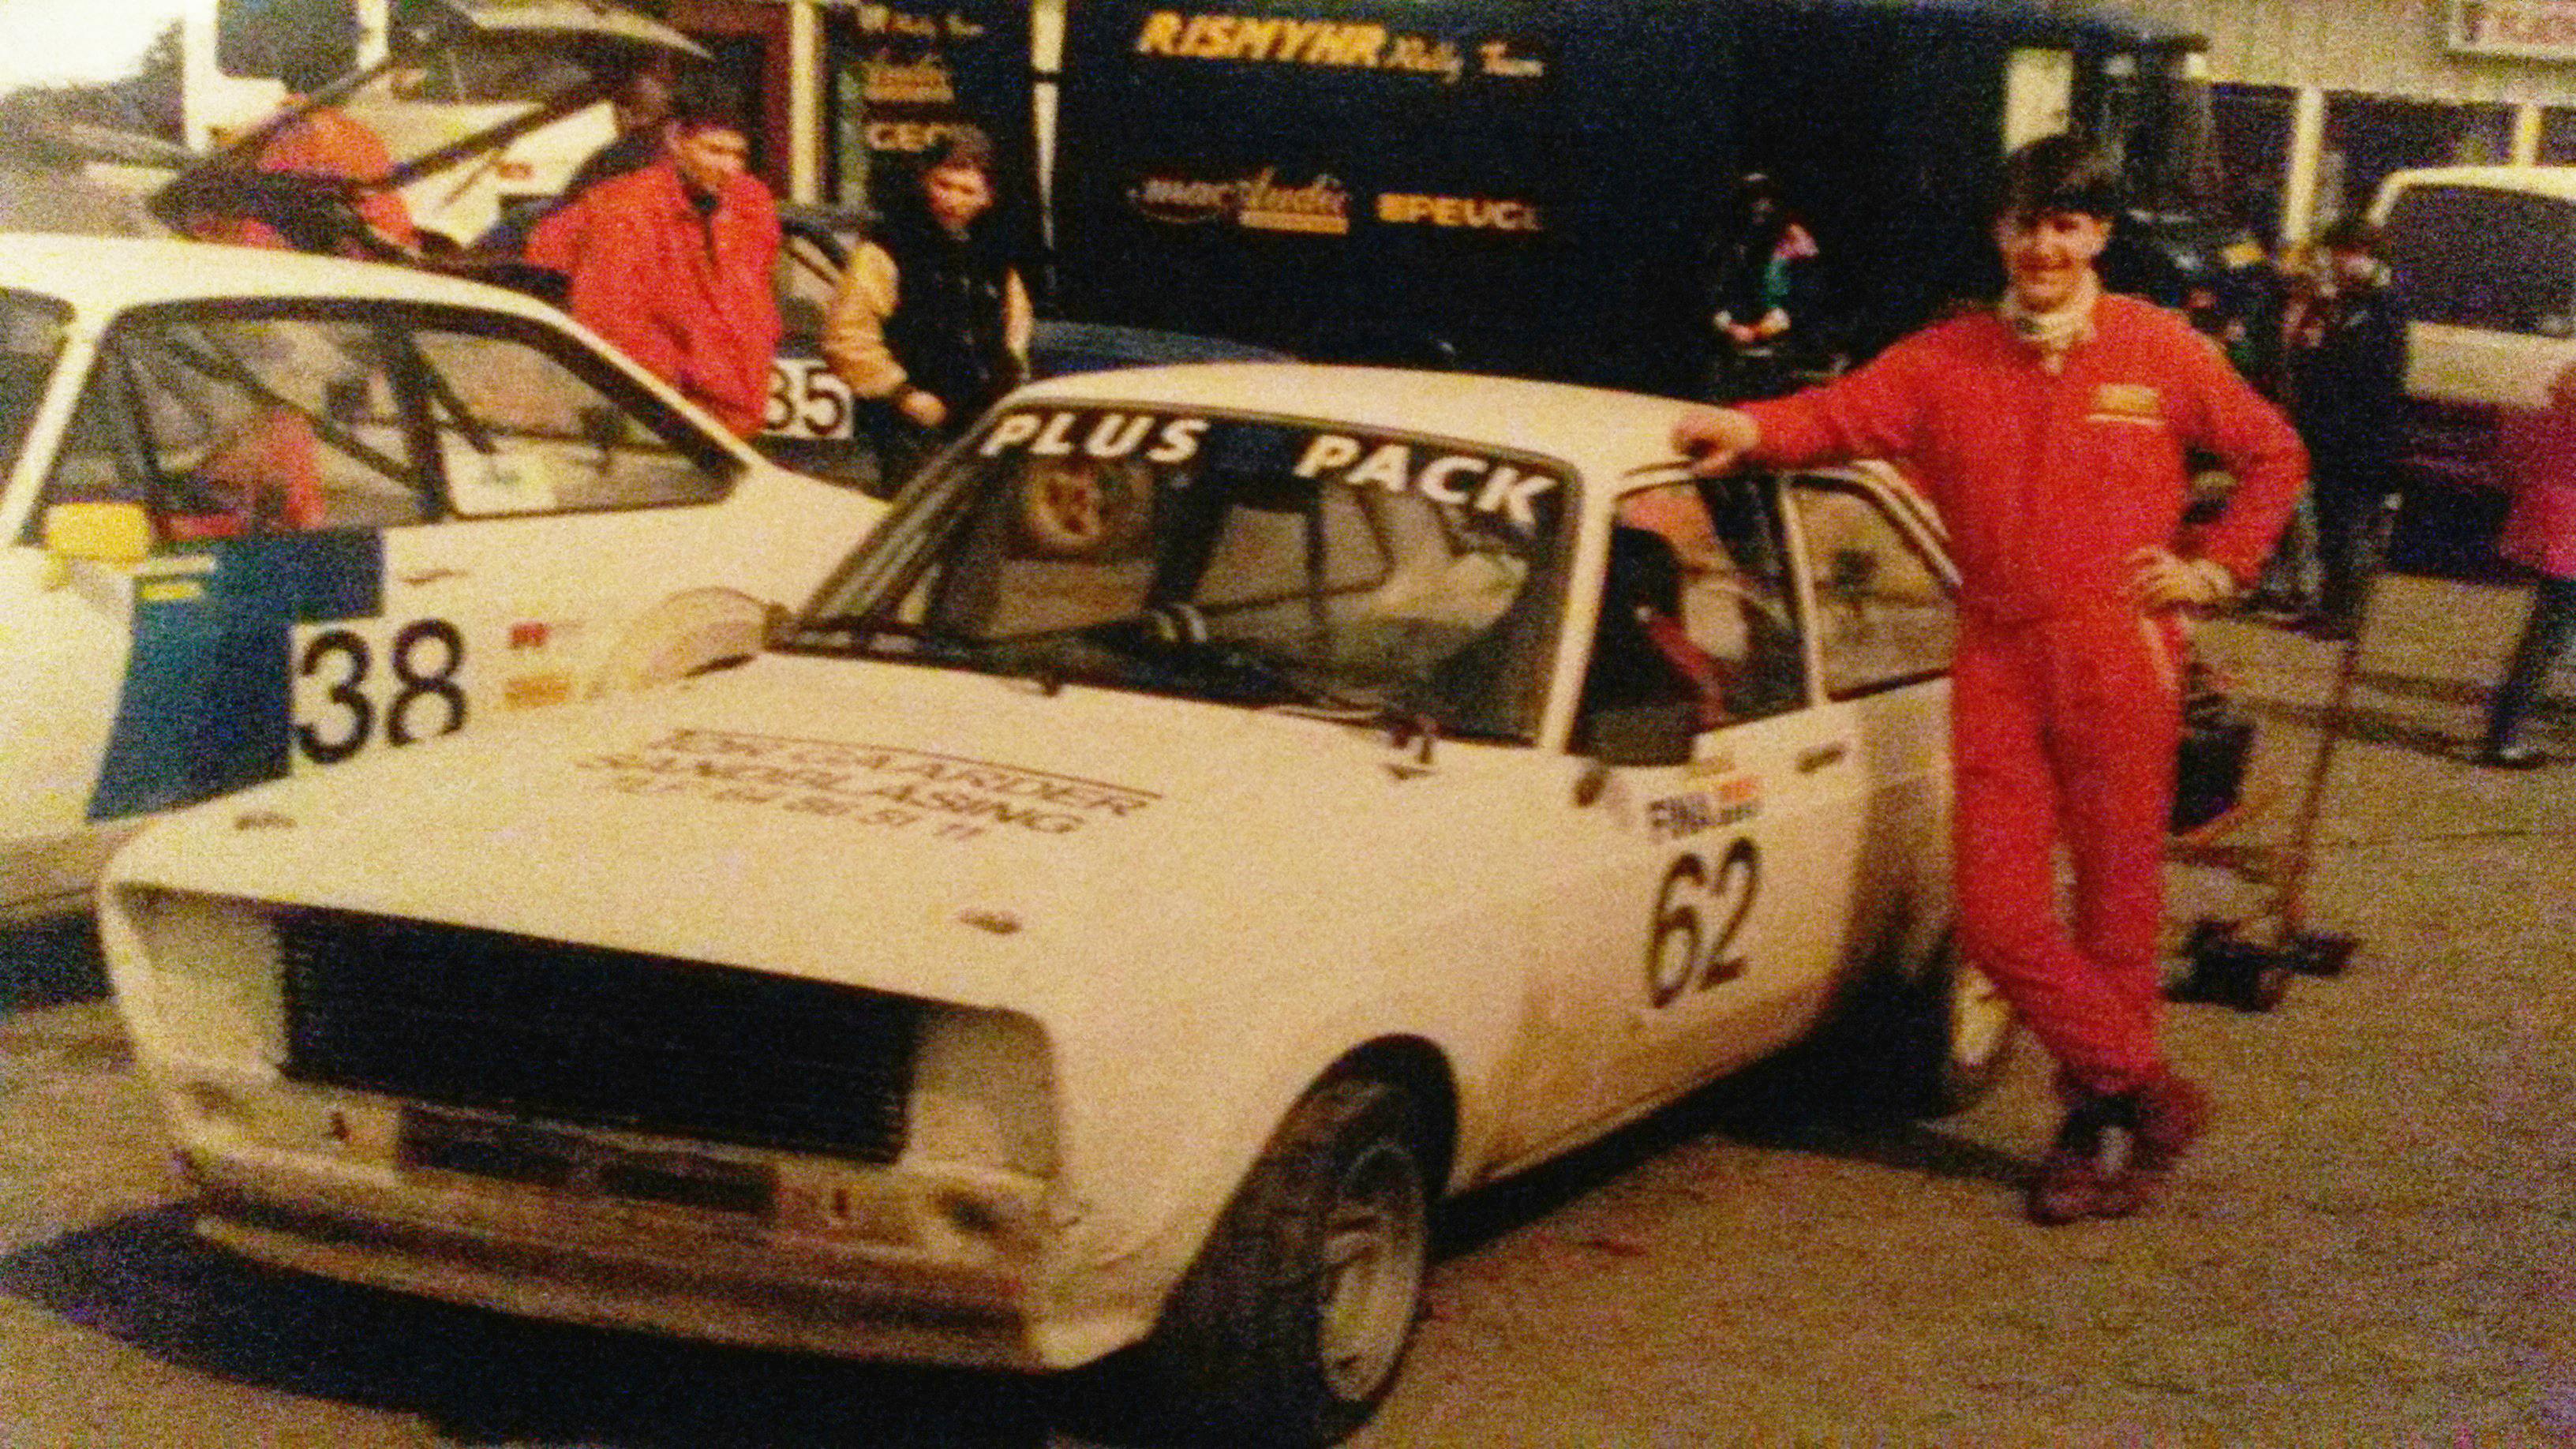 Fredric's father as grassroots rallycross driver 